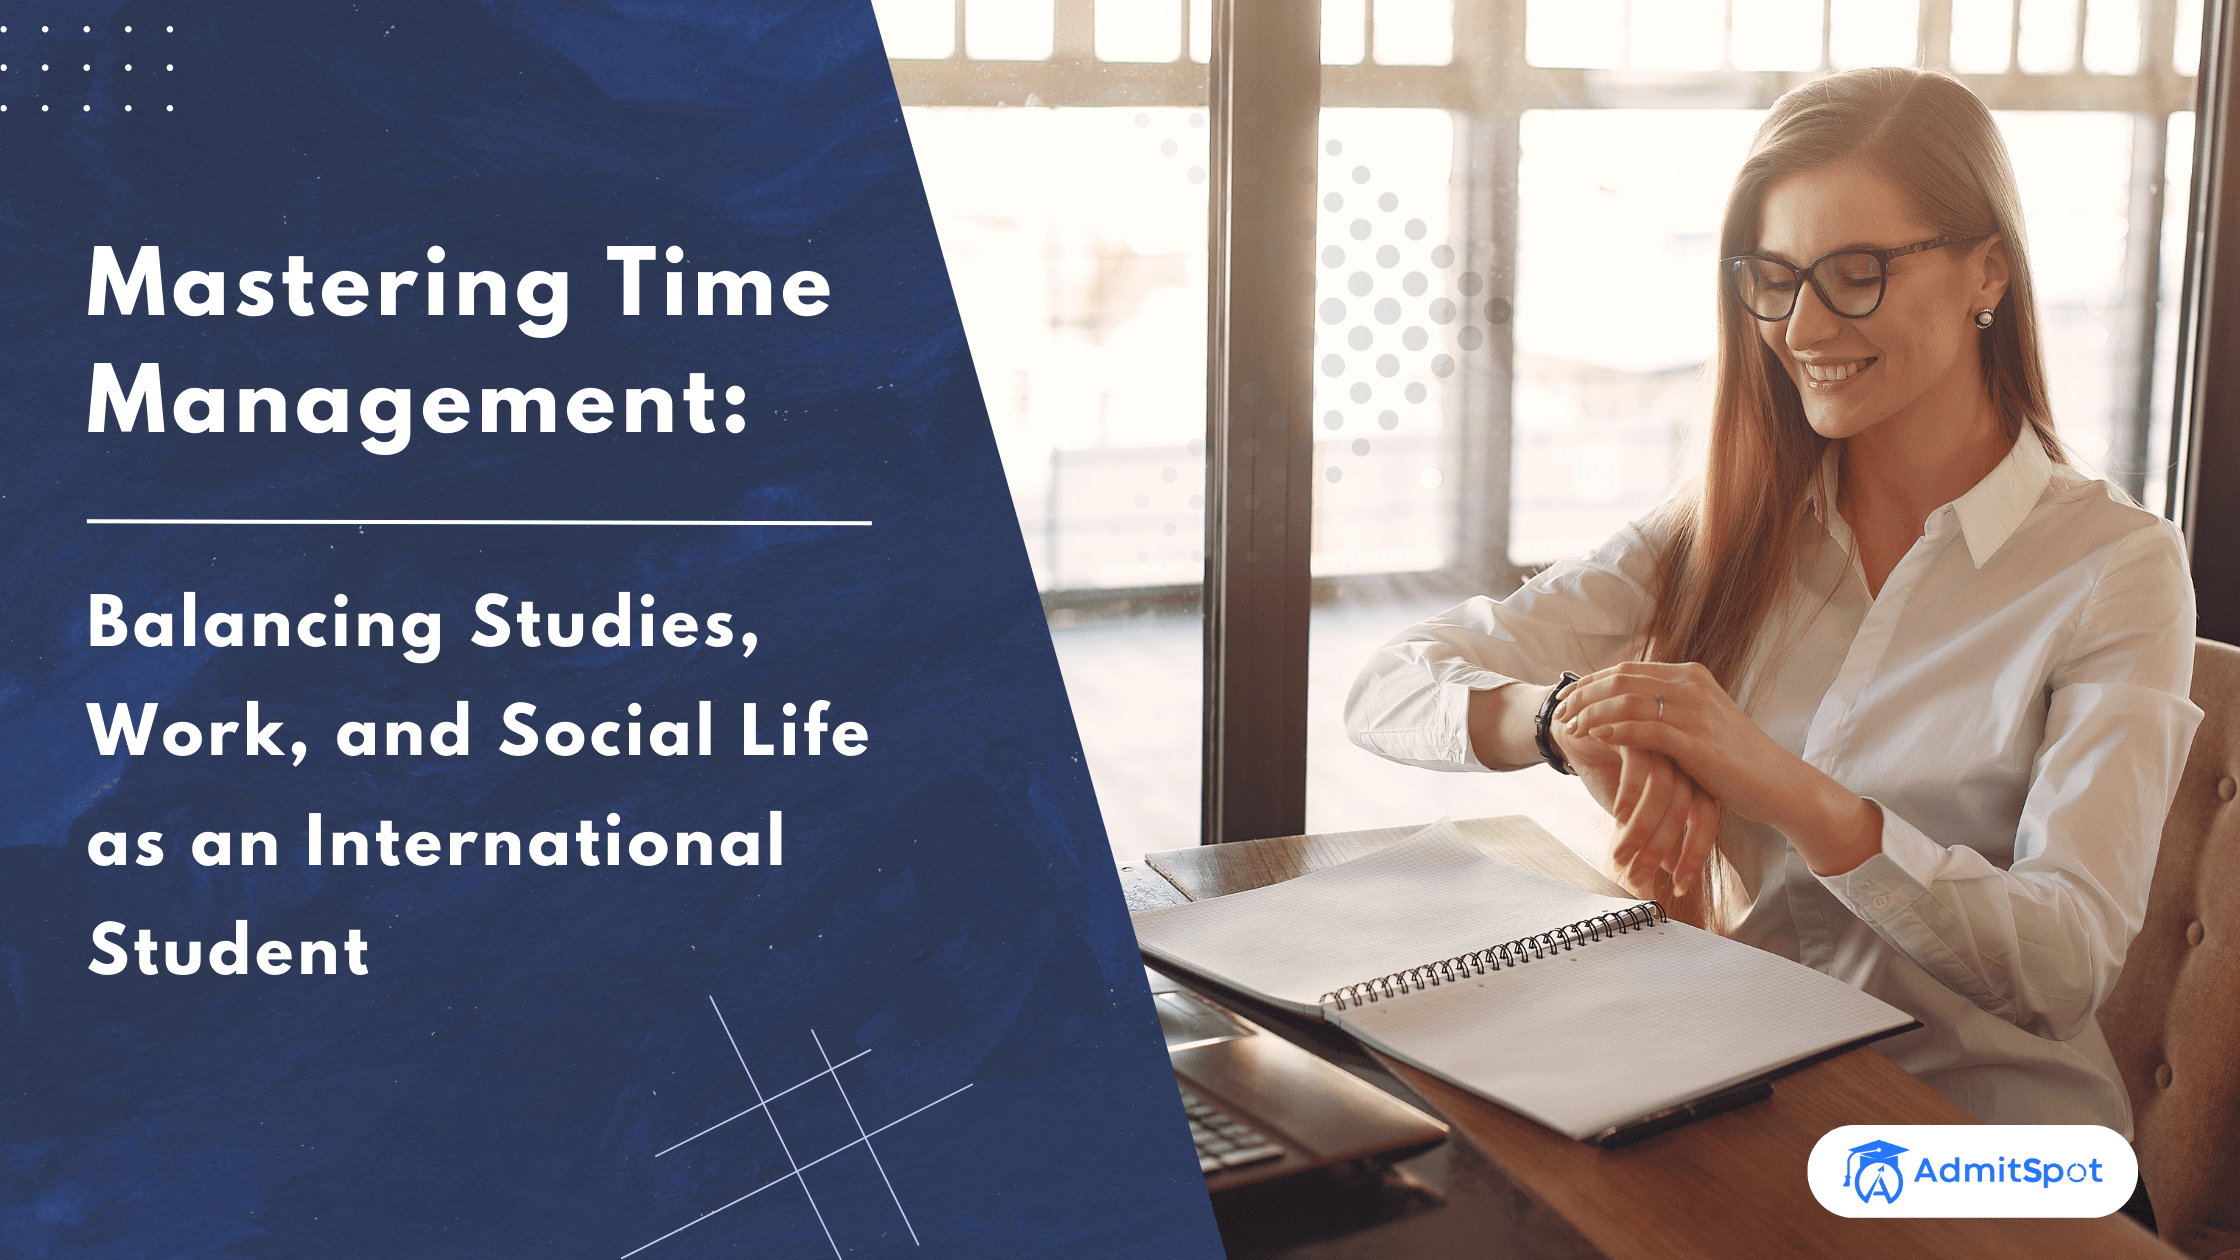 Mastering Time Management: Balancing Studies, Work, and Social Life as an International Student